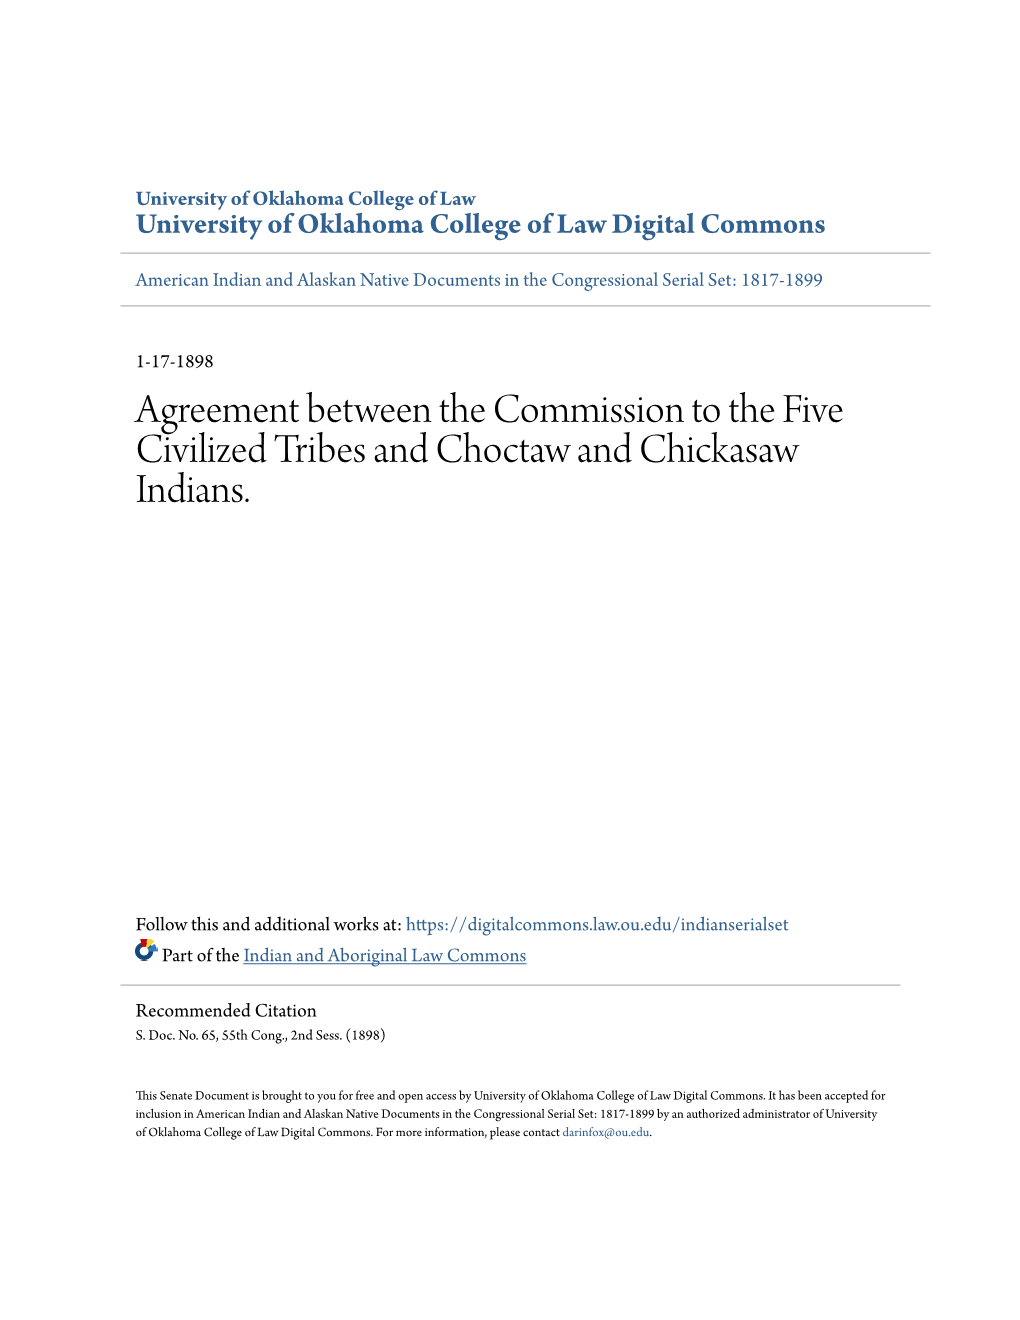 Agreement Between the Commission to the Five Civilized Tribes and Choctaw and Chickasaw Indians